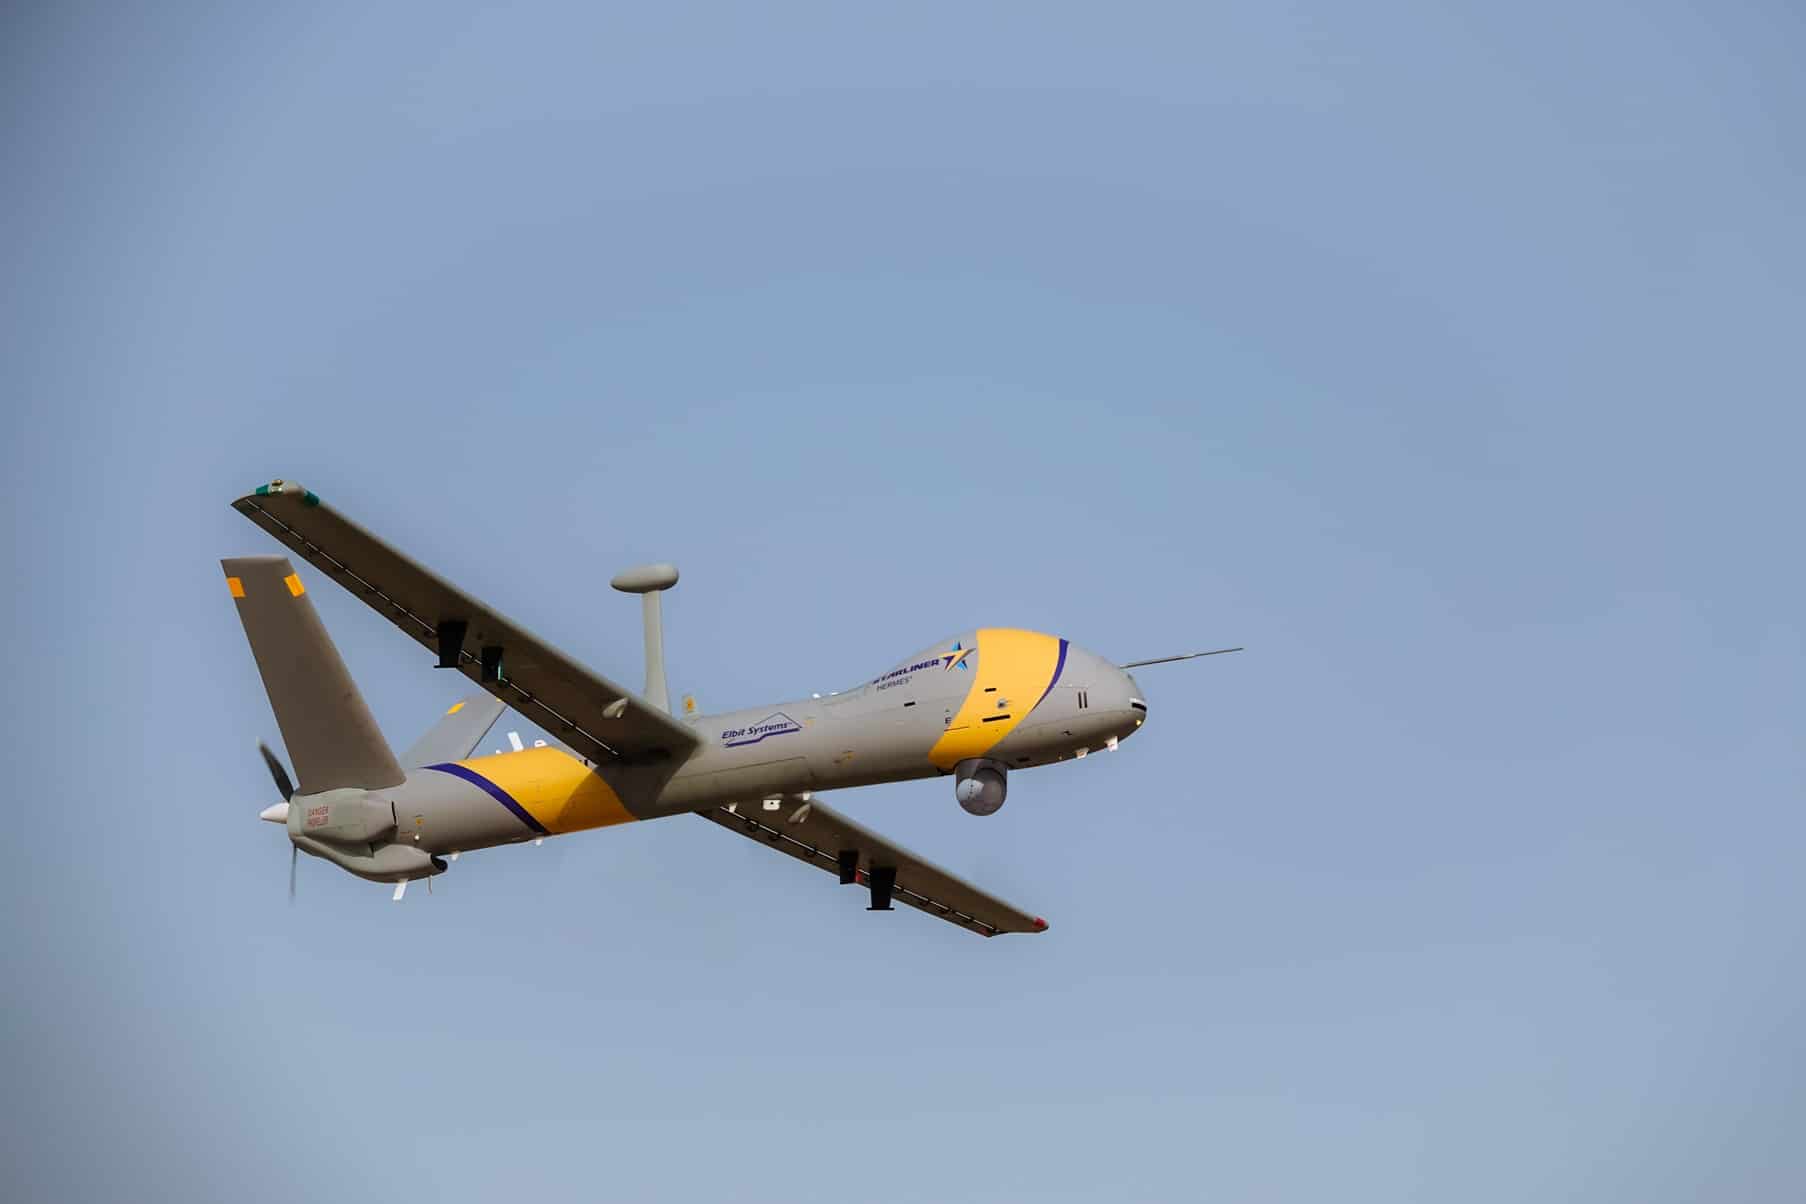 Israel Certifies Unmanned Aircraft System for Integration in Civilian Airspace